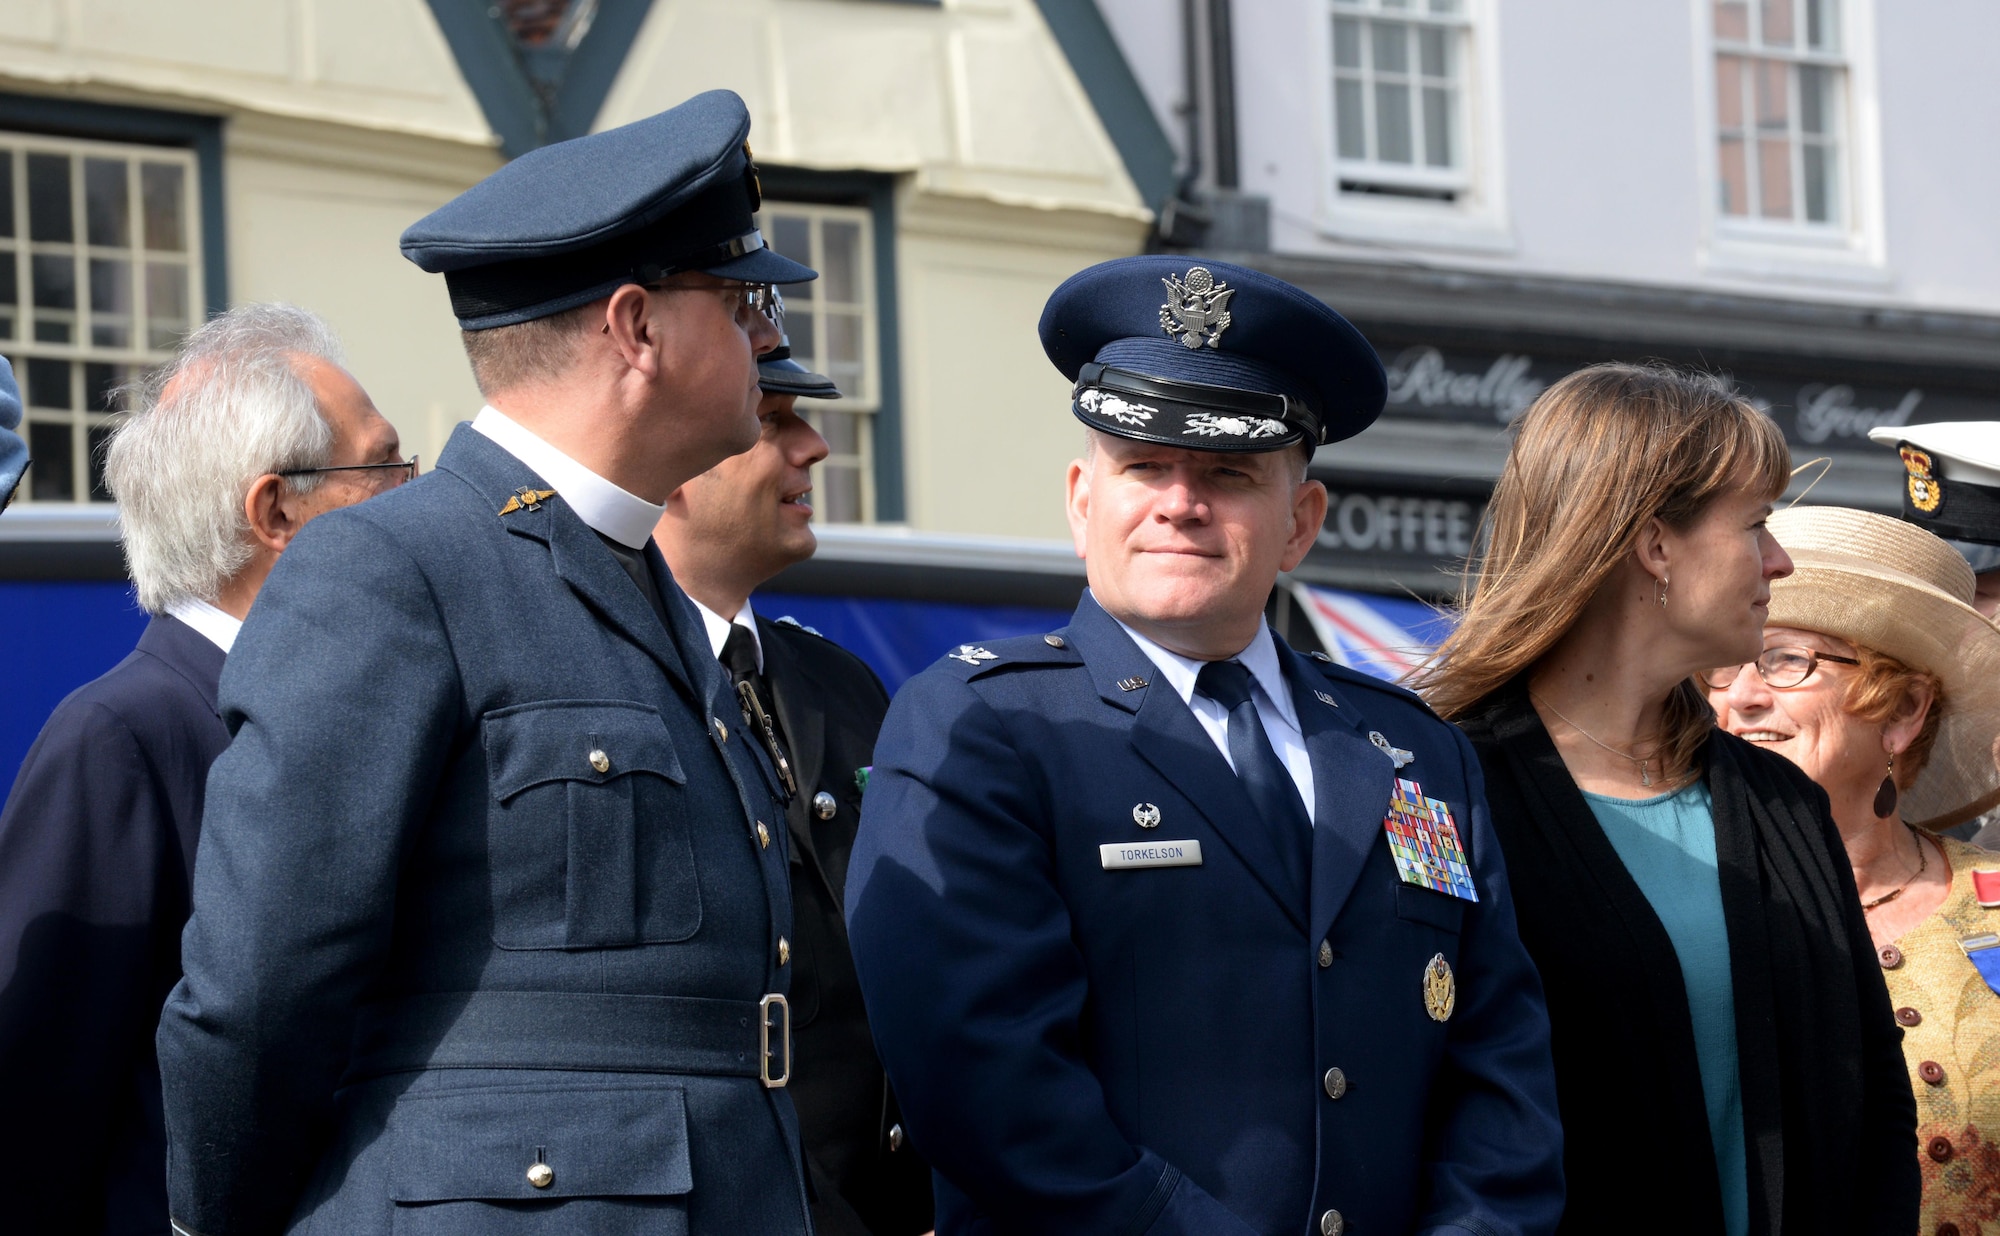 U.S. Air Force Col. Thomas Torkelson, center, 100th Air Refueling Wing commander, and his wife, Debbie, right, attend the Battle of Britain parade Sept. 19, 2016, in Bury St. Edmunds, England. The parade pays tribute to those who served in the Battle of Britain in 1940. (U.S. Air Force photo by Airman 1st Class Tenley Long)

